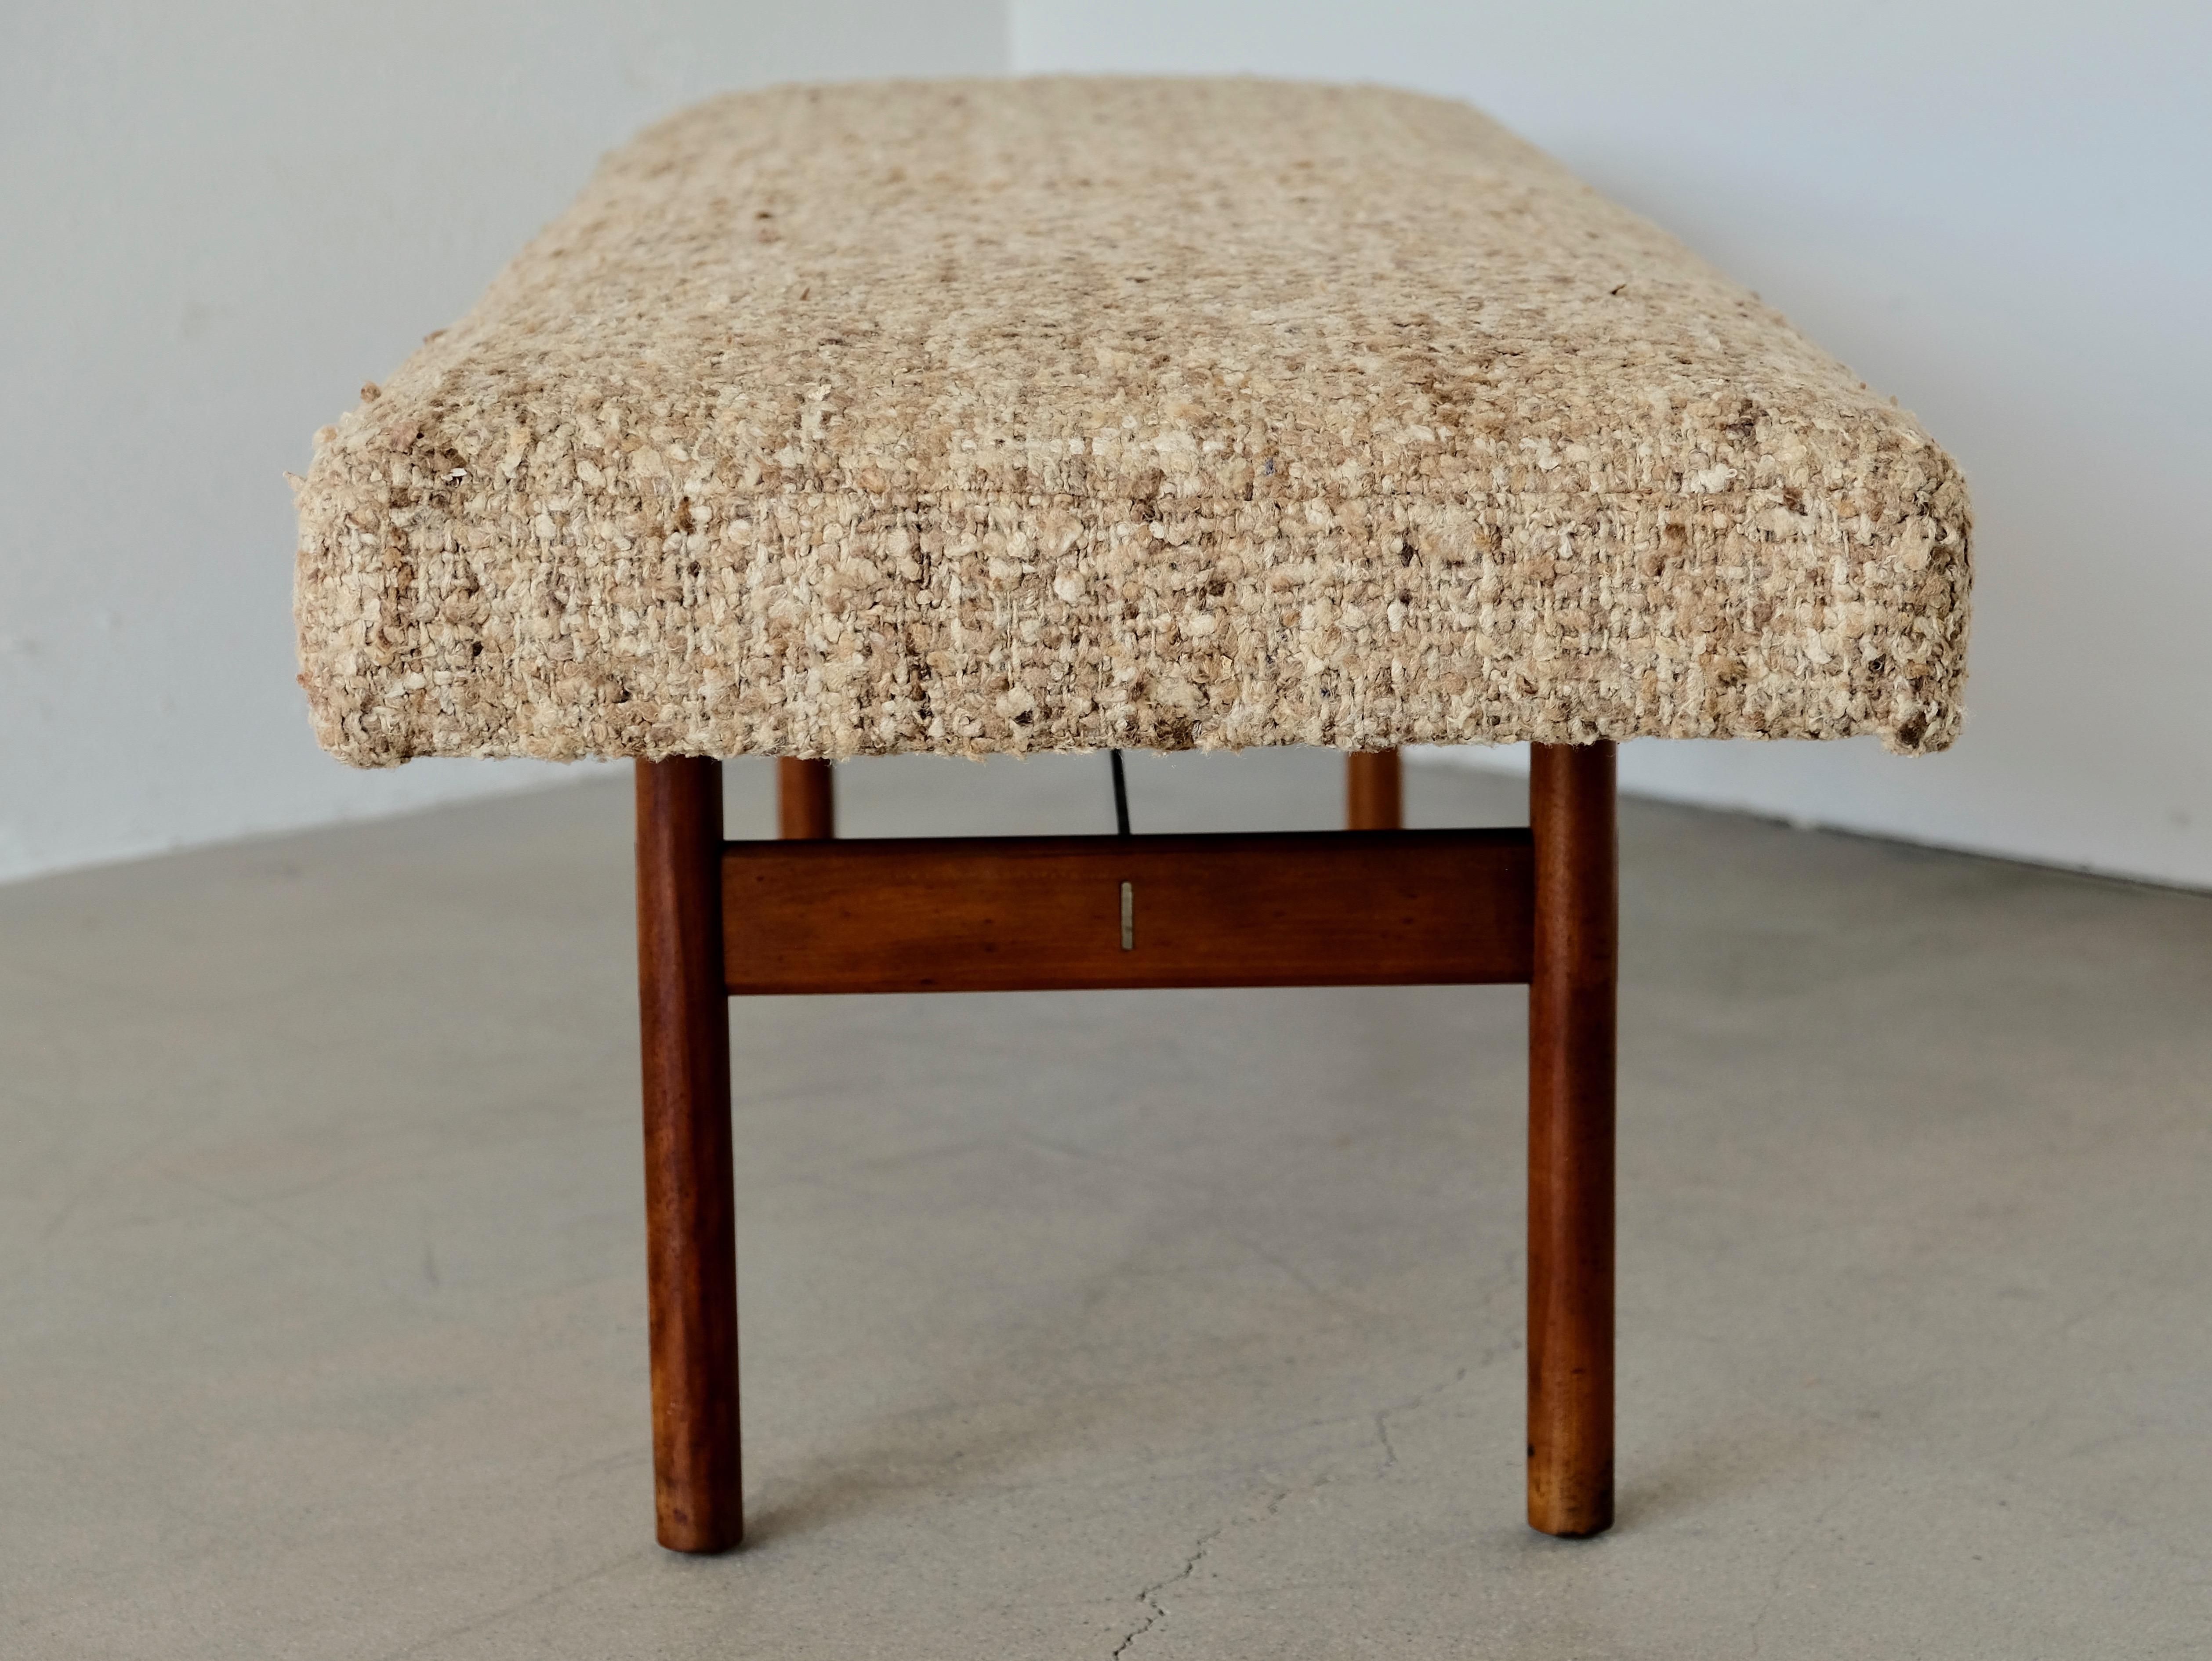 20th Century Midcentury Wood and Aluminum Bench with Woven Nubby Natural Tweed Fabric